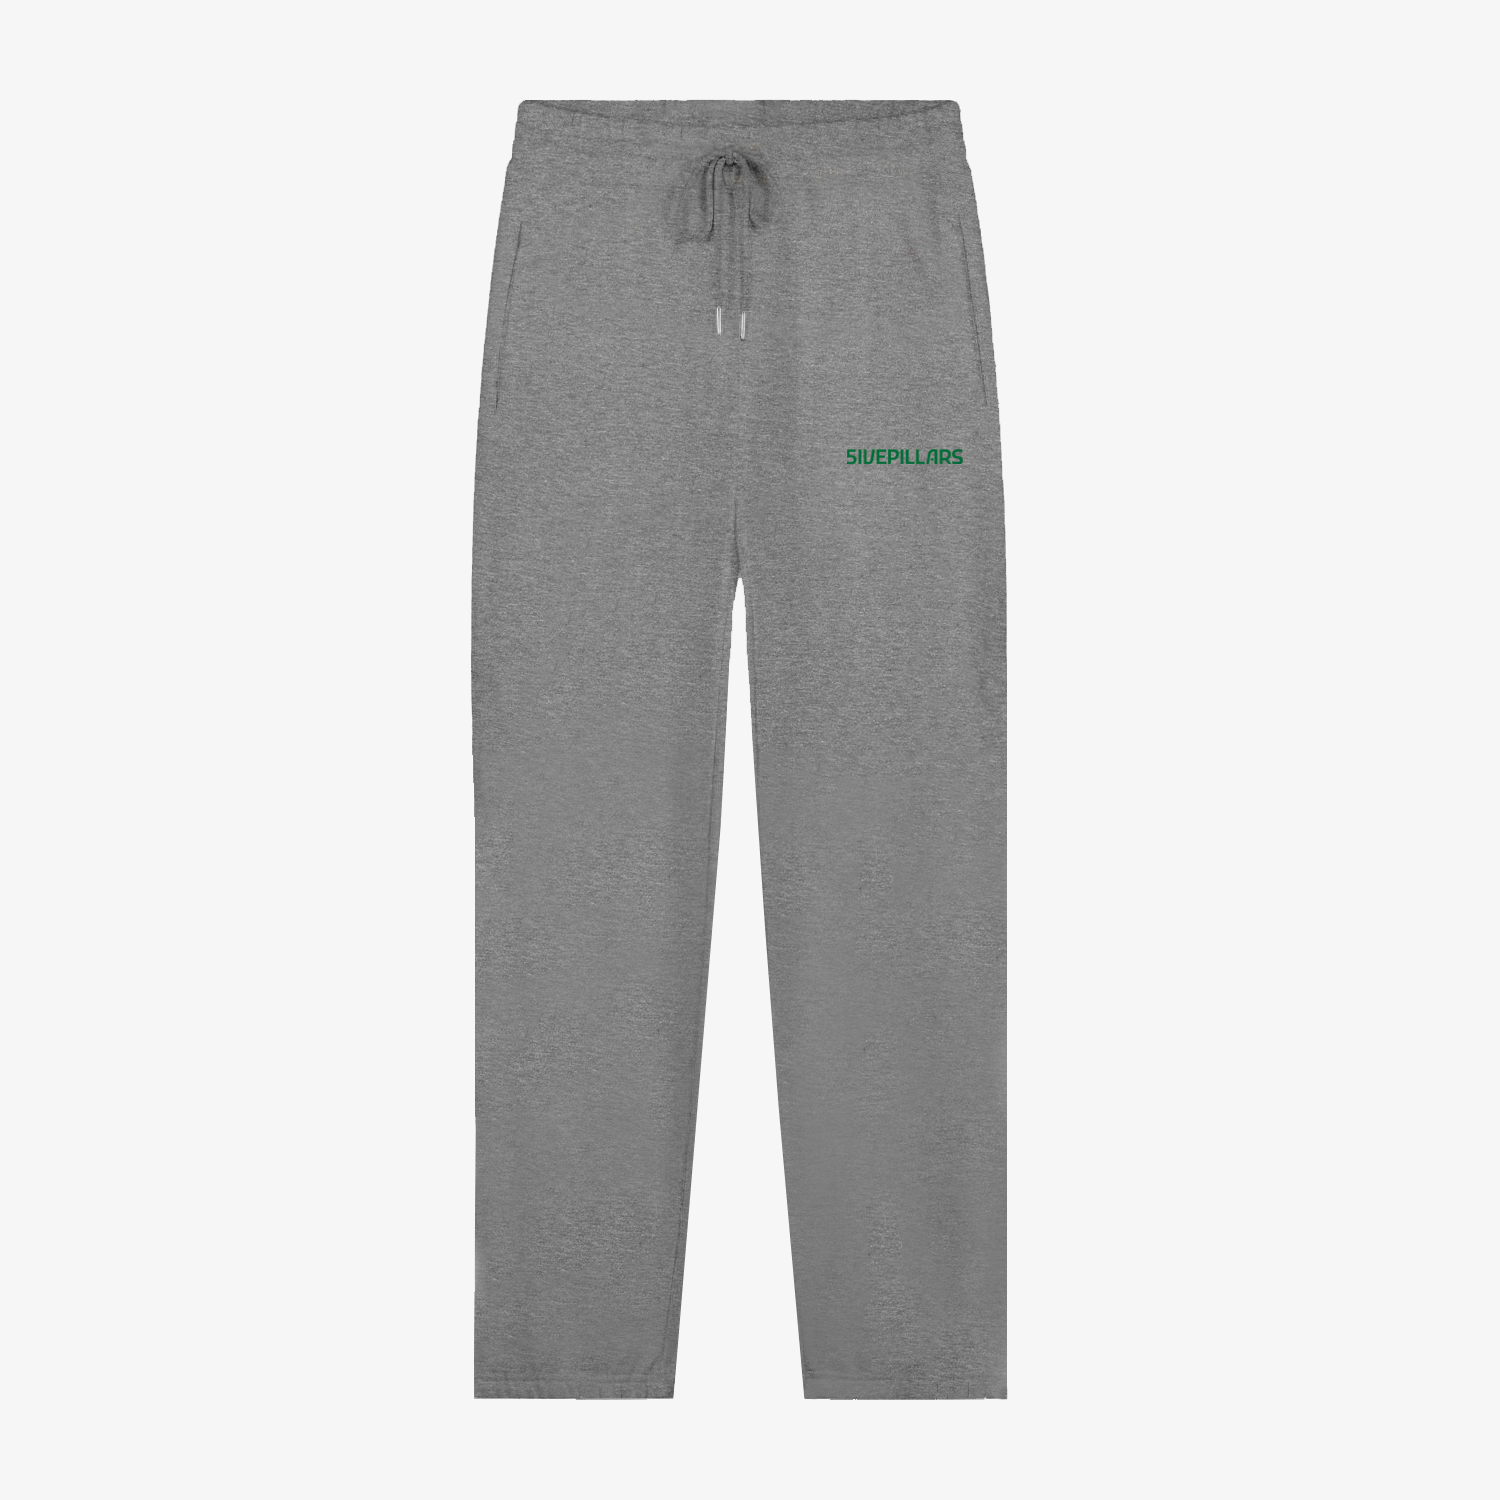 5ivepillars Relaxed Fit Sweatpants - Heather Grey